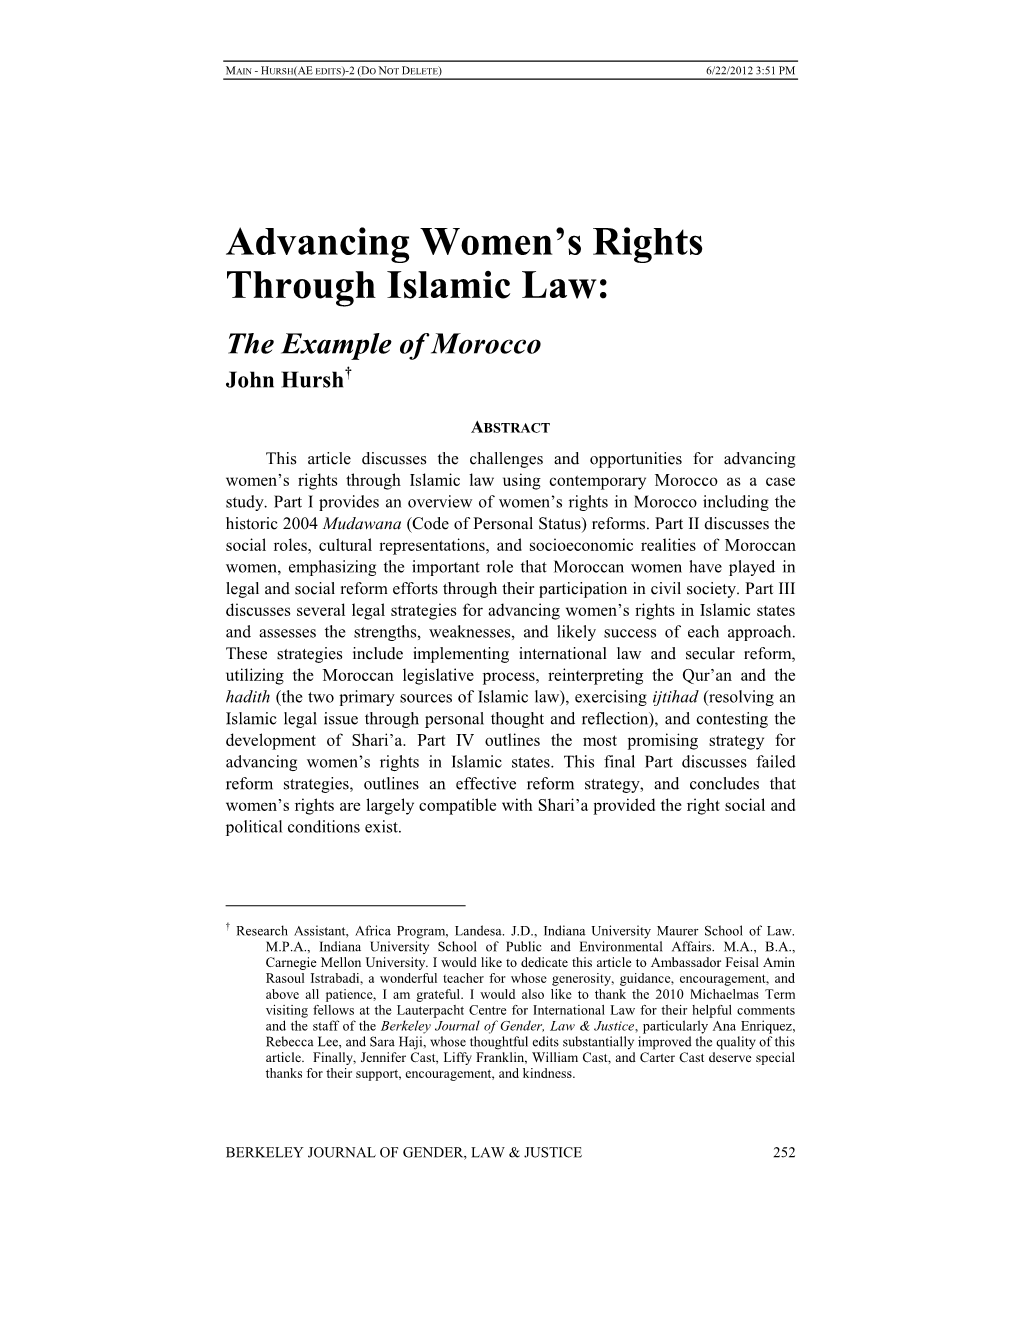 Advancing Women's Rights Through Islamic Law: the Example of Morocco